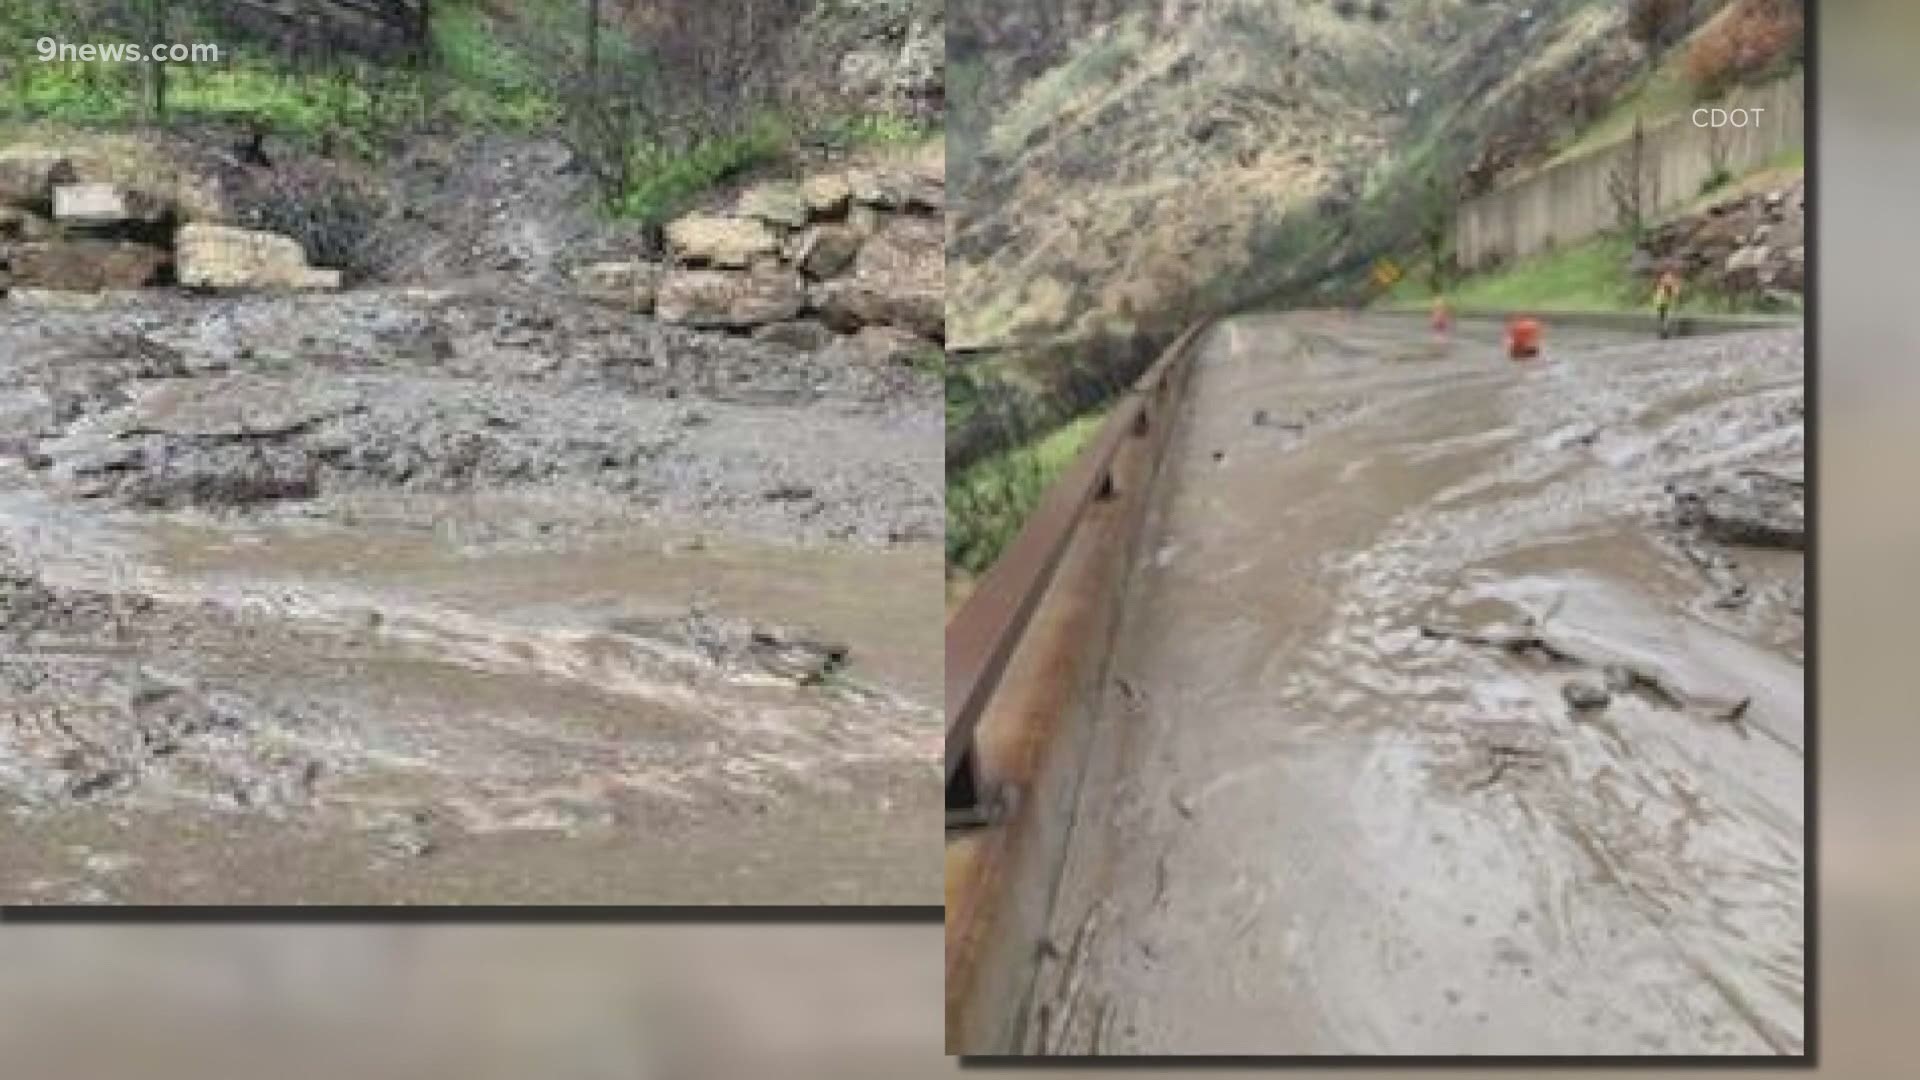 Rain is acting as a double-edged sword in Colorado. It helps with fire containment, but also creates mudslides.